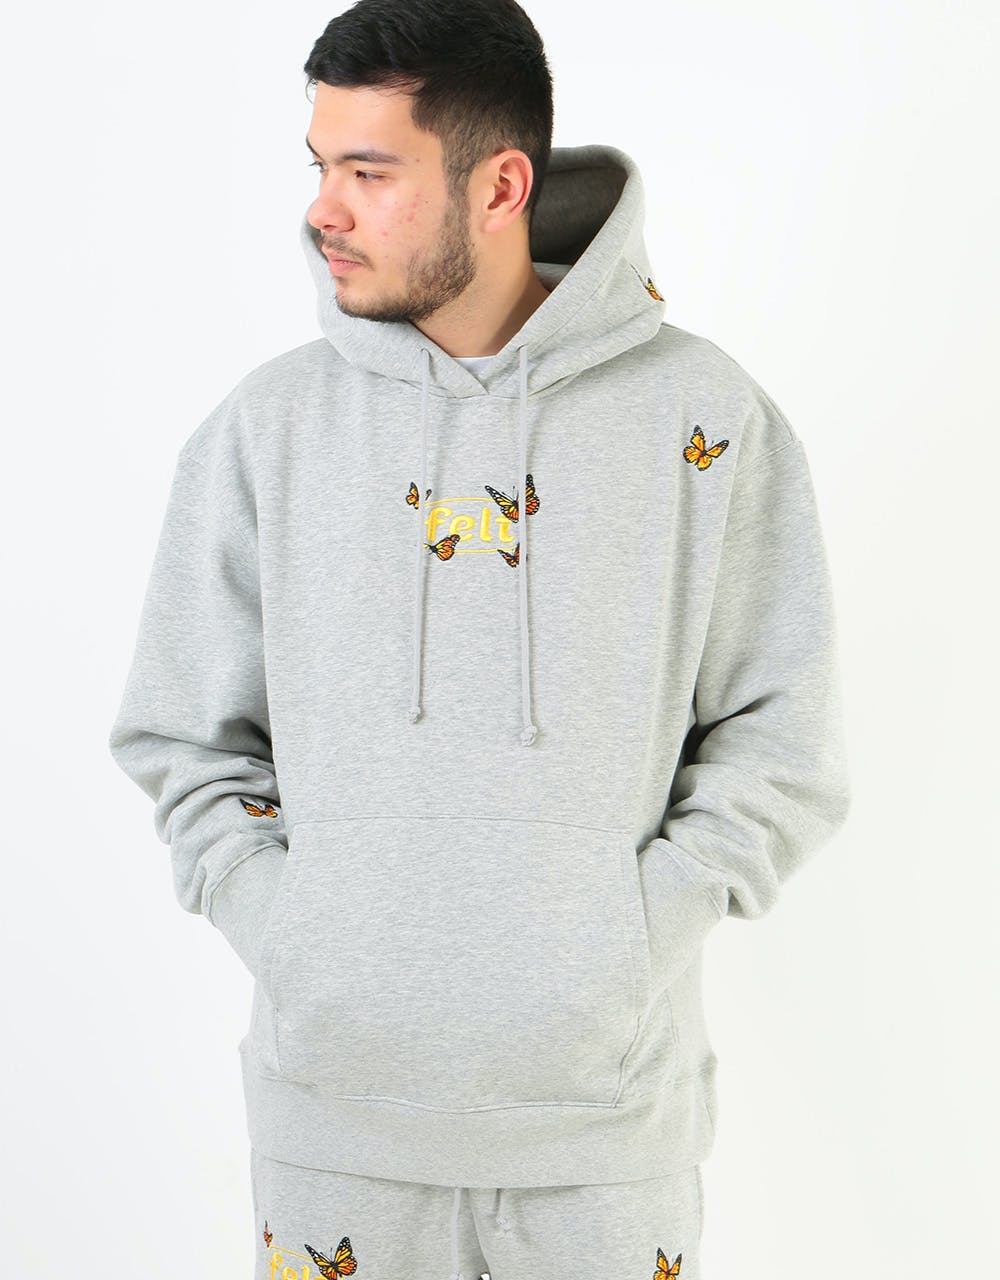 Felt Butterfly Embroidered Pullover Hoodie - Heather Grey